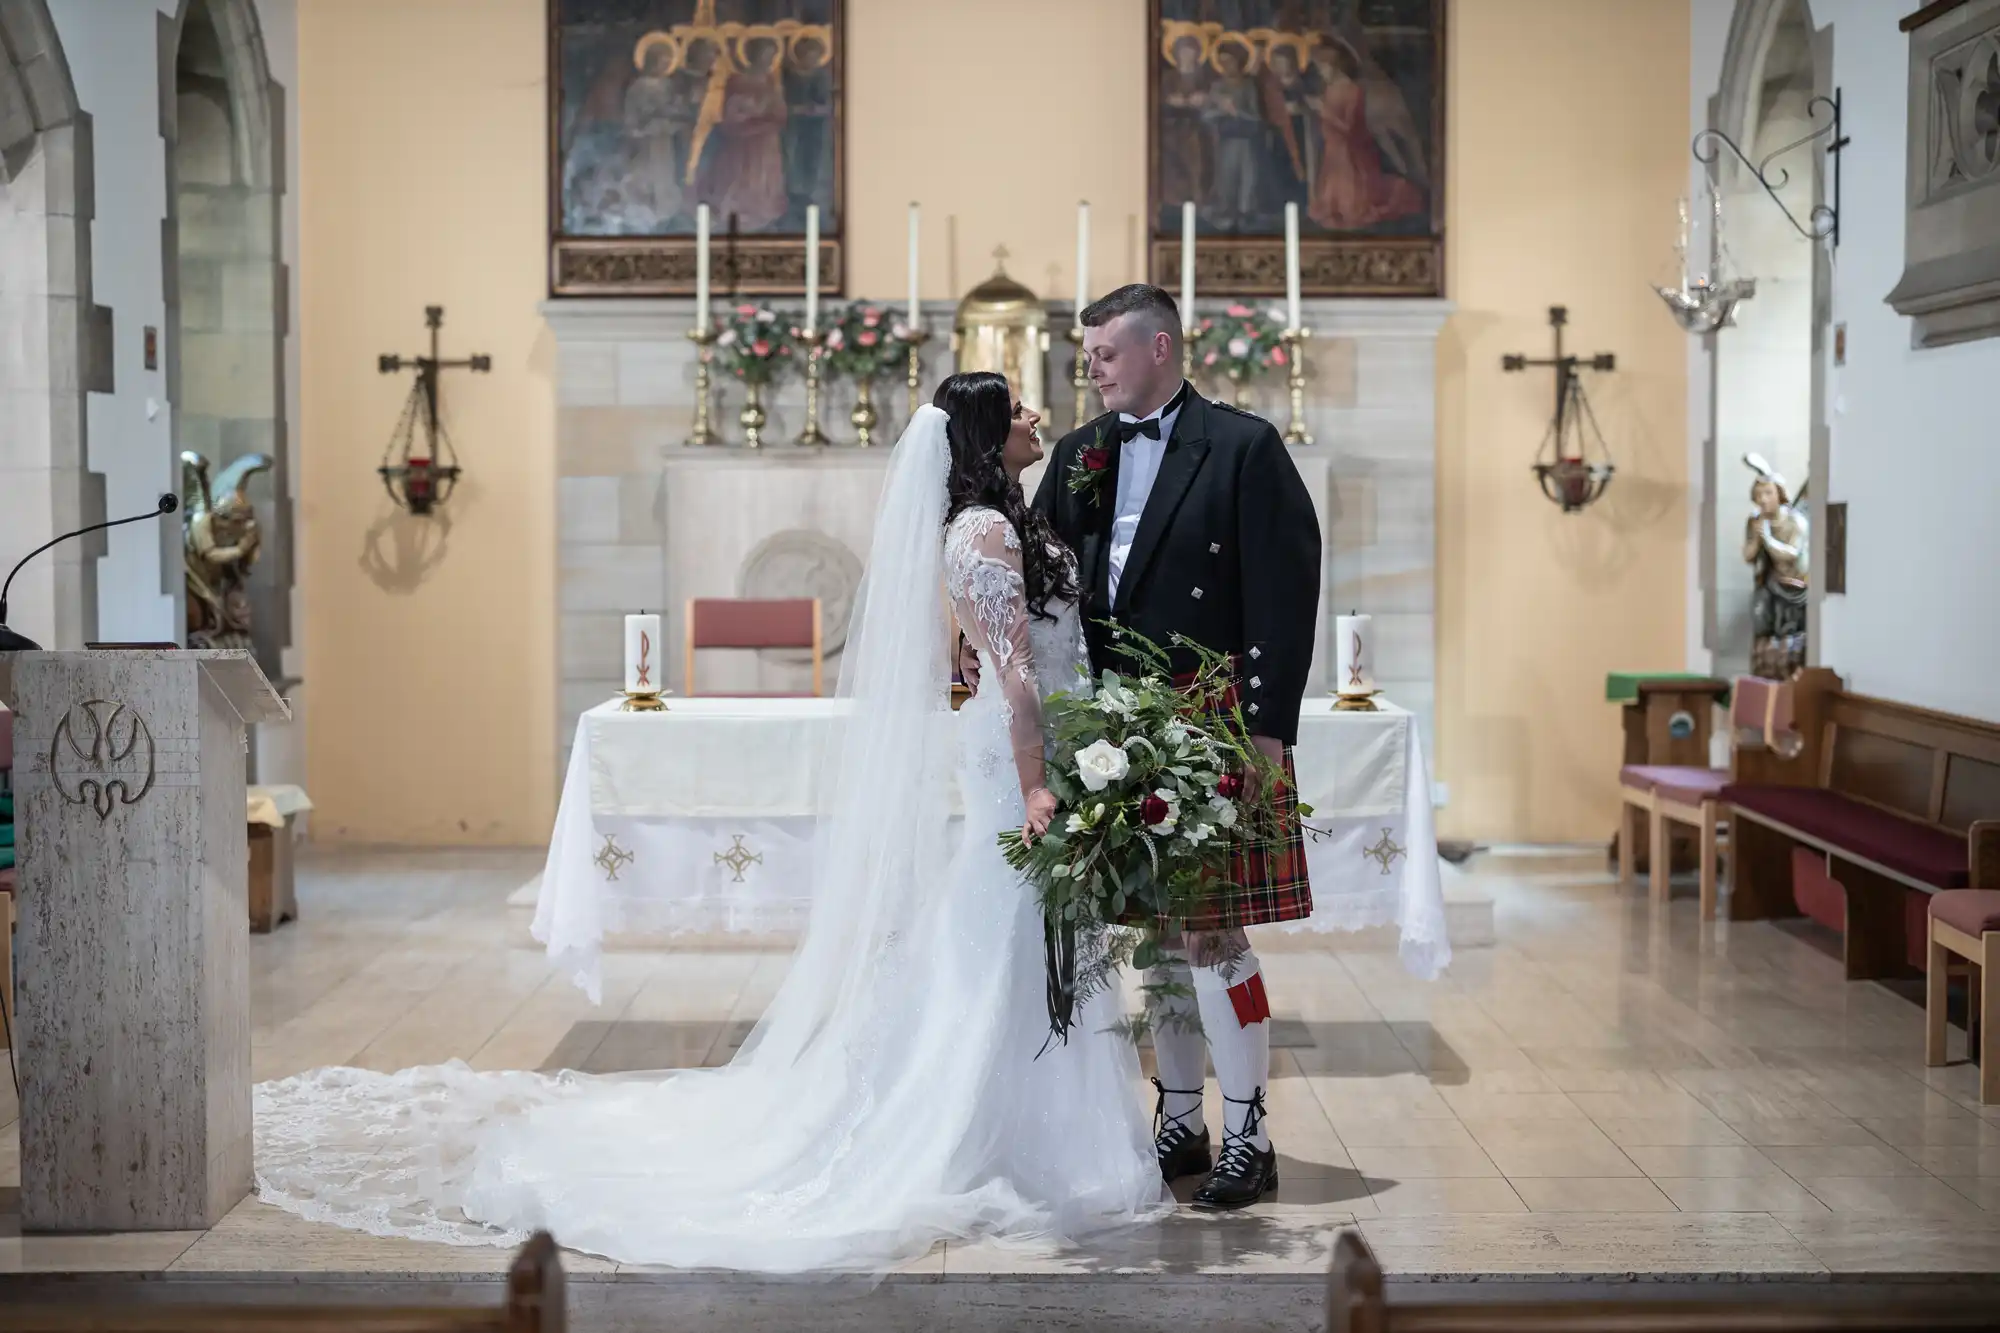 A bride in a long white dress and a groom in a kilt holding hands in a church, smiling at each other lovingly.